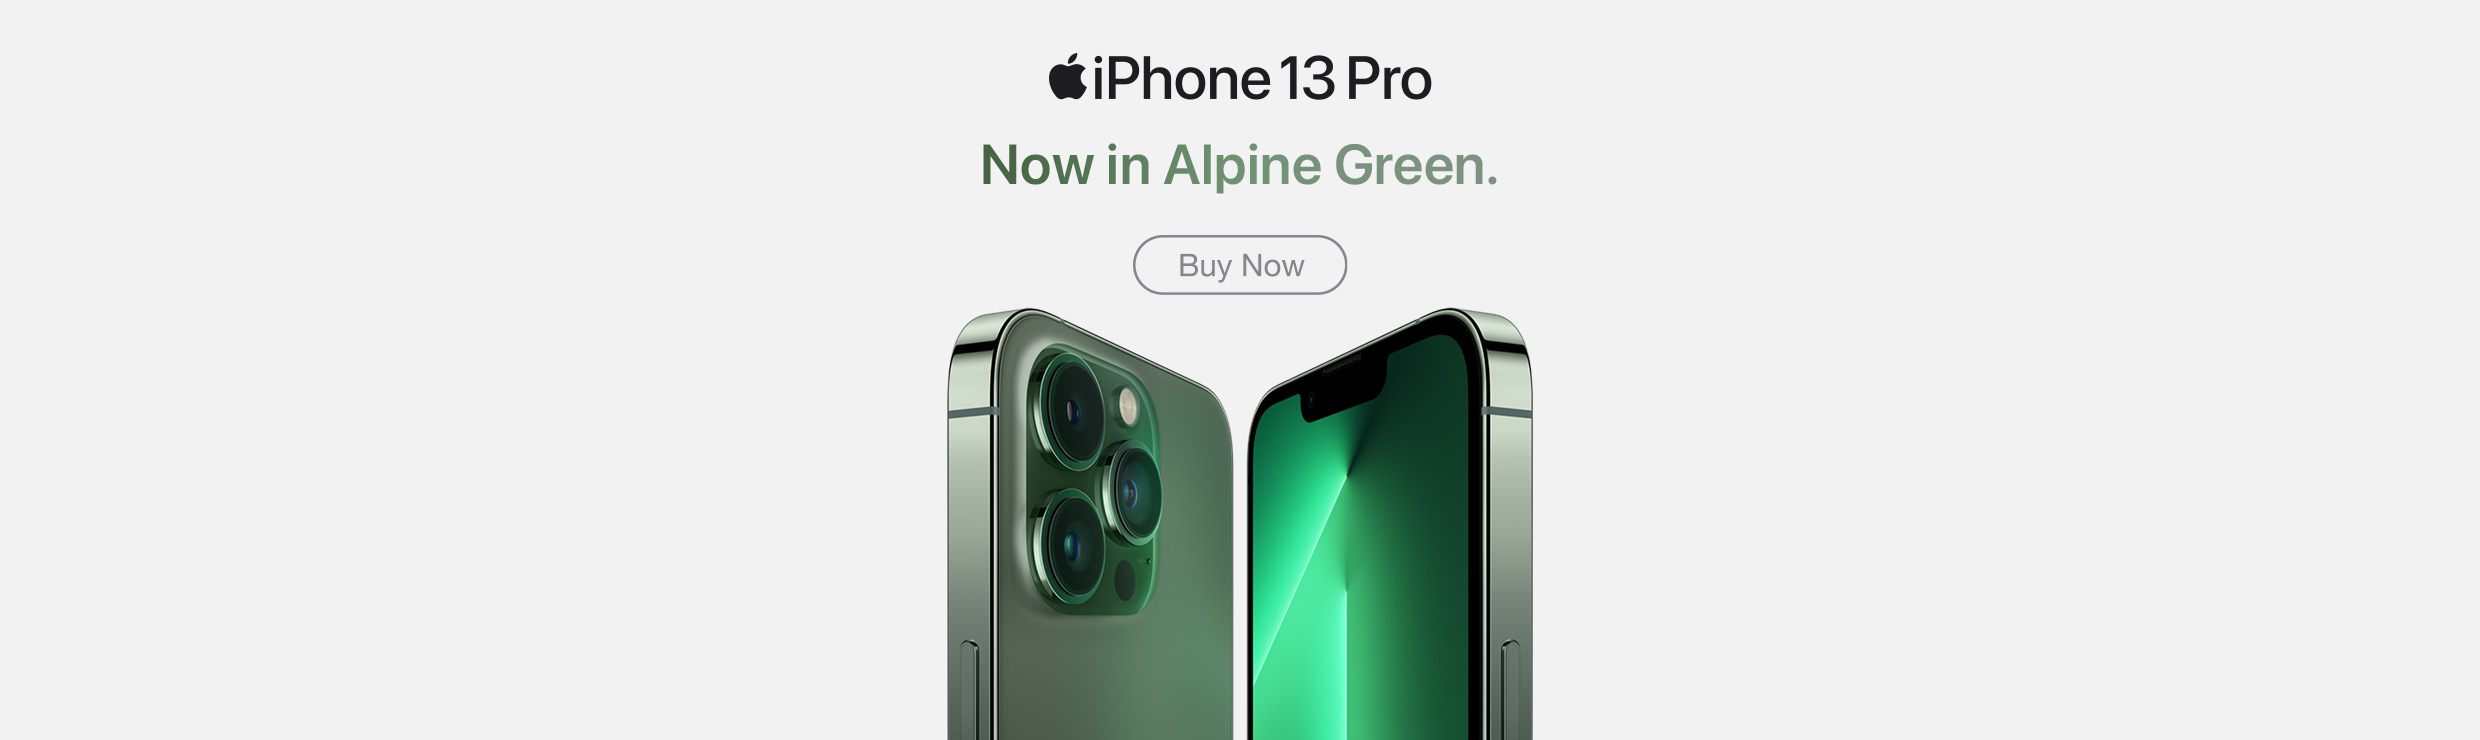 New iPhone 13 Pro Alpine Green Learn More